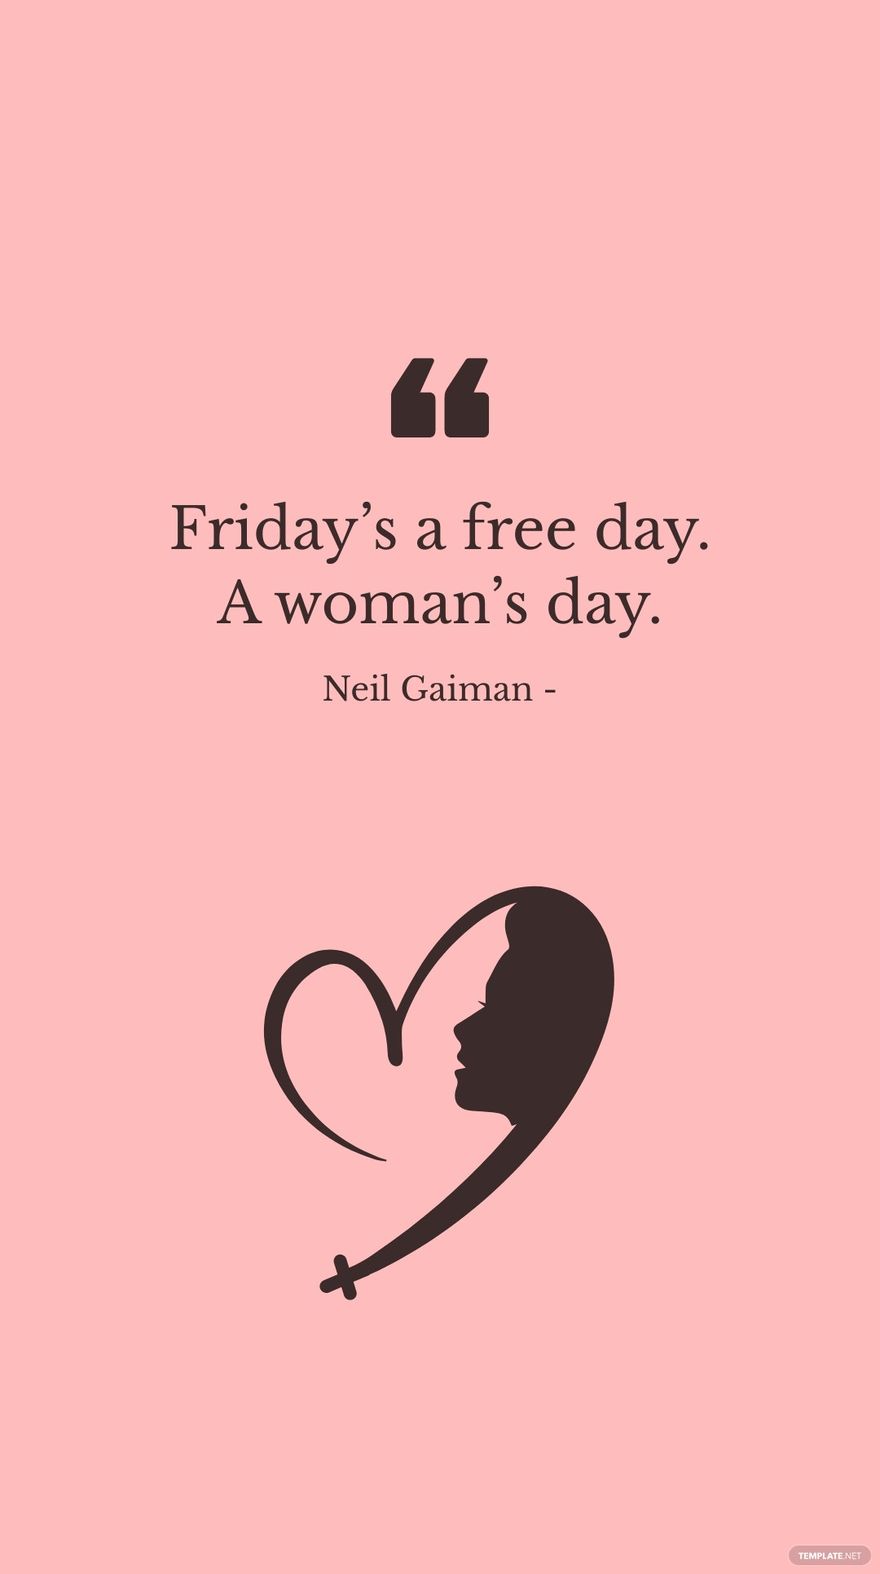 Neil Gaiman - Friday’s a day. A woman’s day.